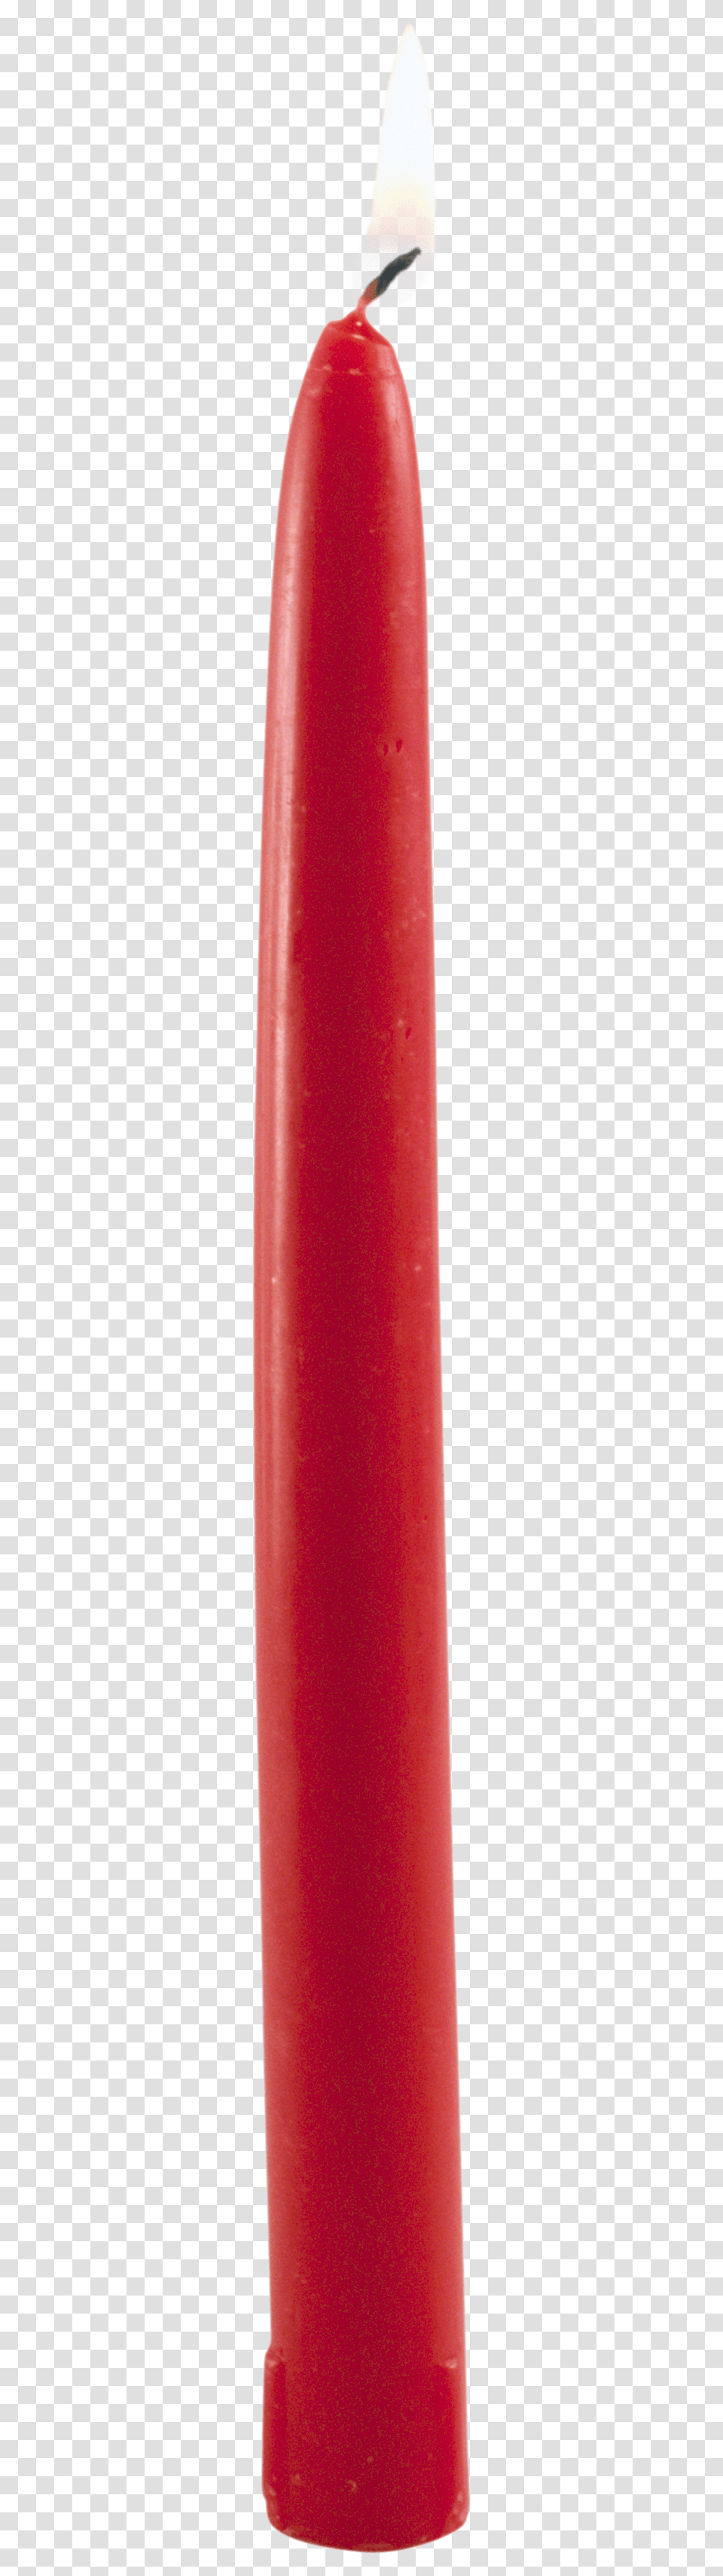 Candle, Cylinder, Texture, Cosmetics, Bottle Transparent Png